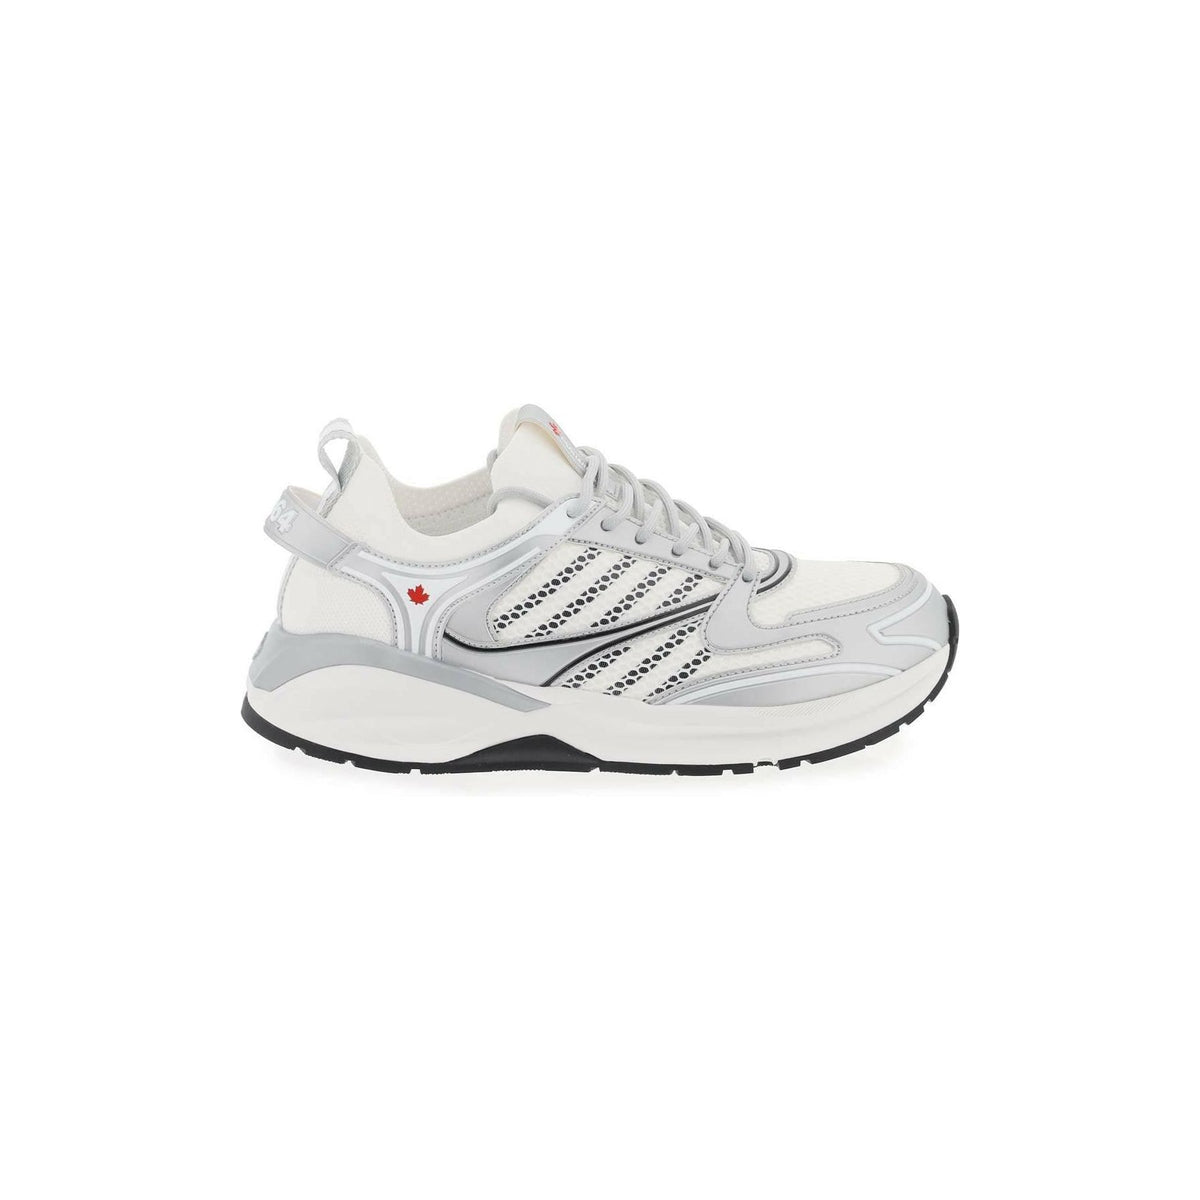 White and Silver Dash Running Sneakers DSQUARED2 JOHN JULIA.